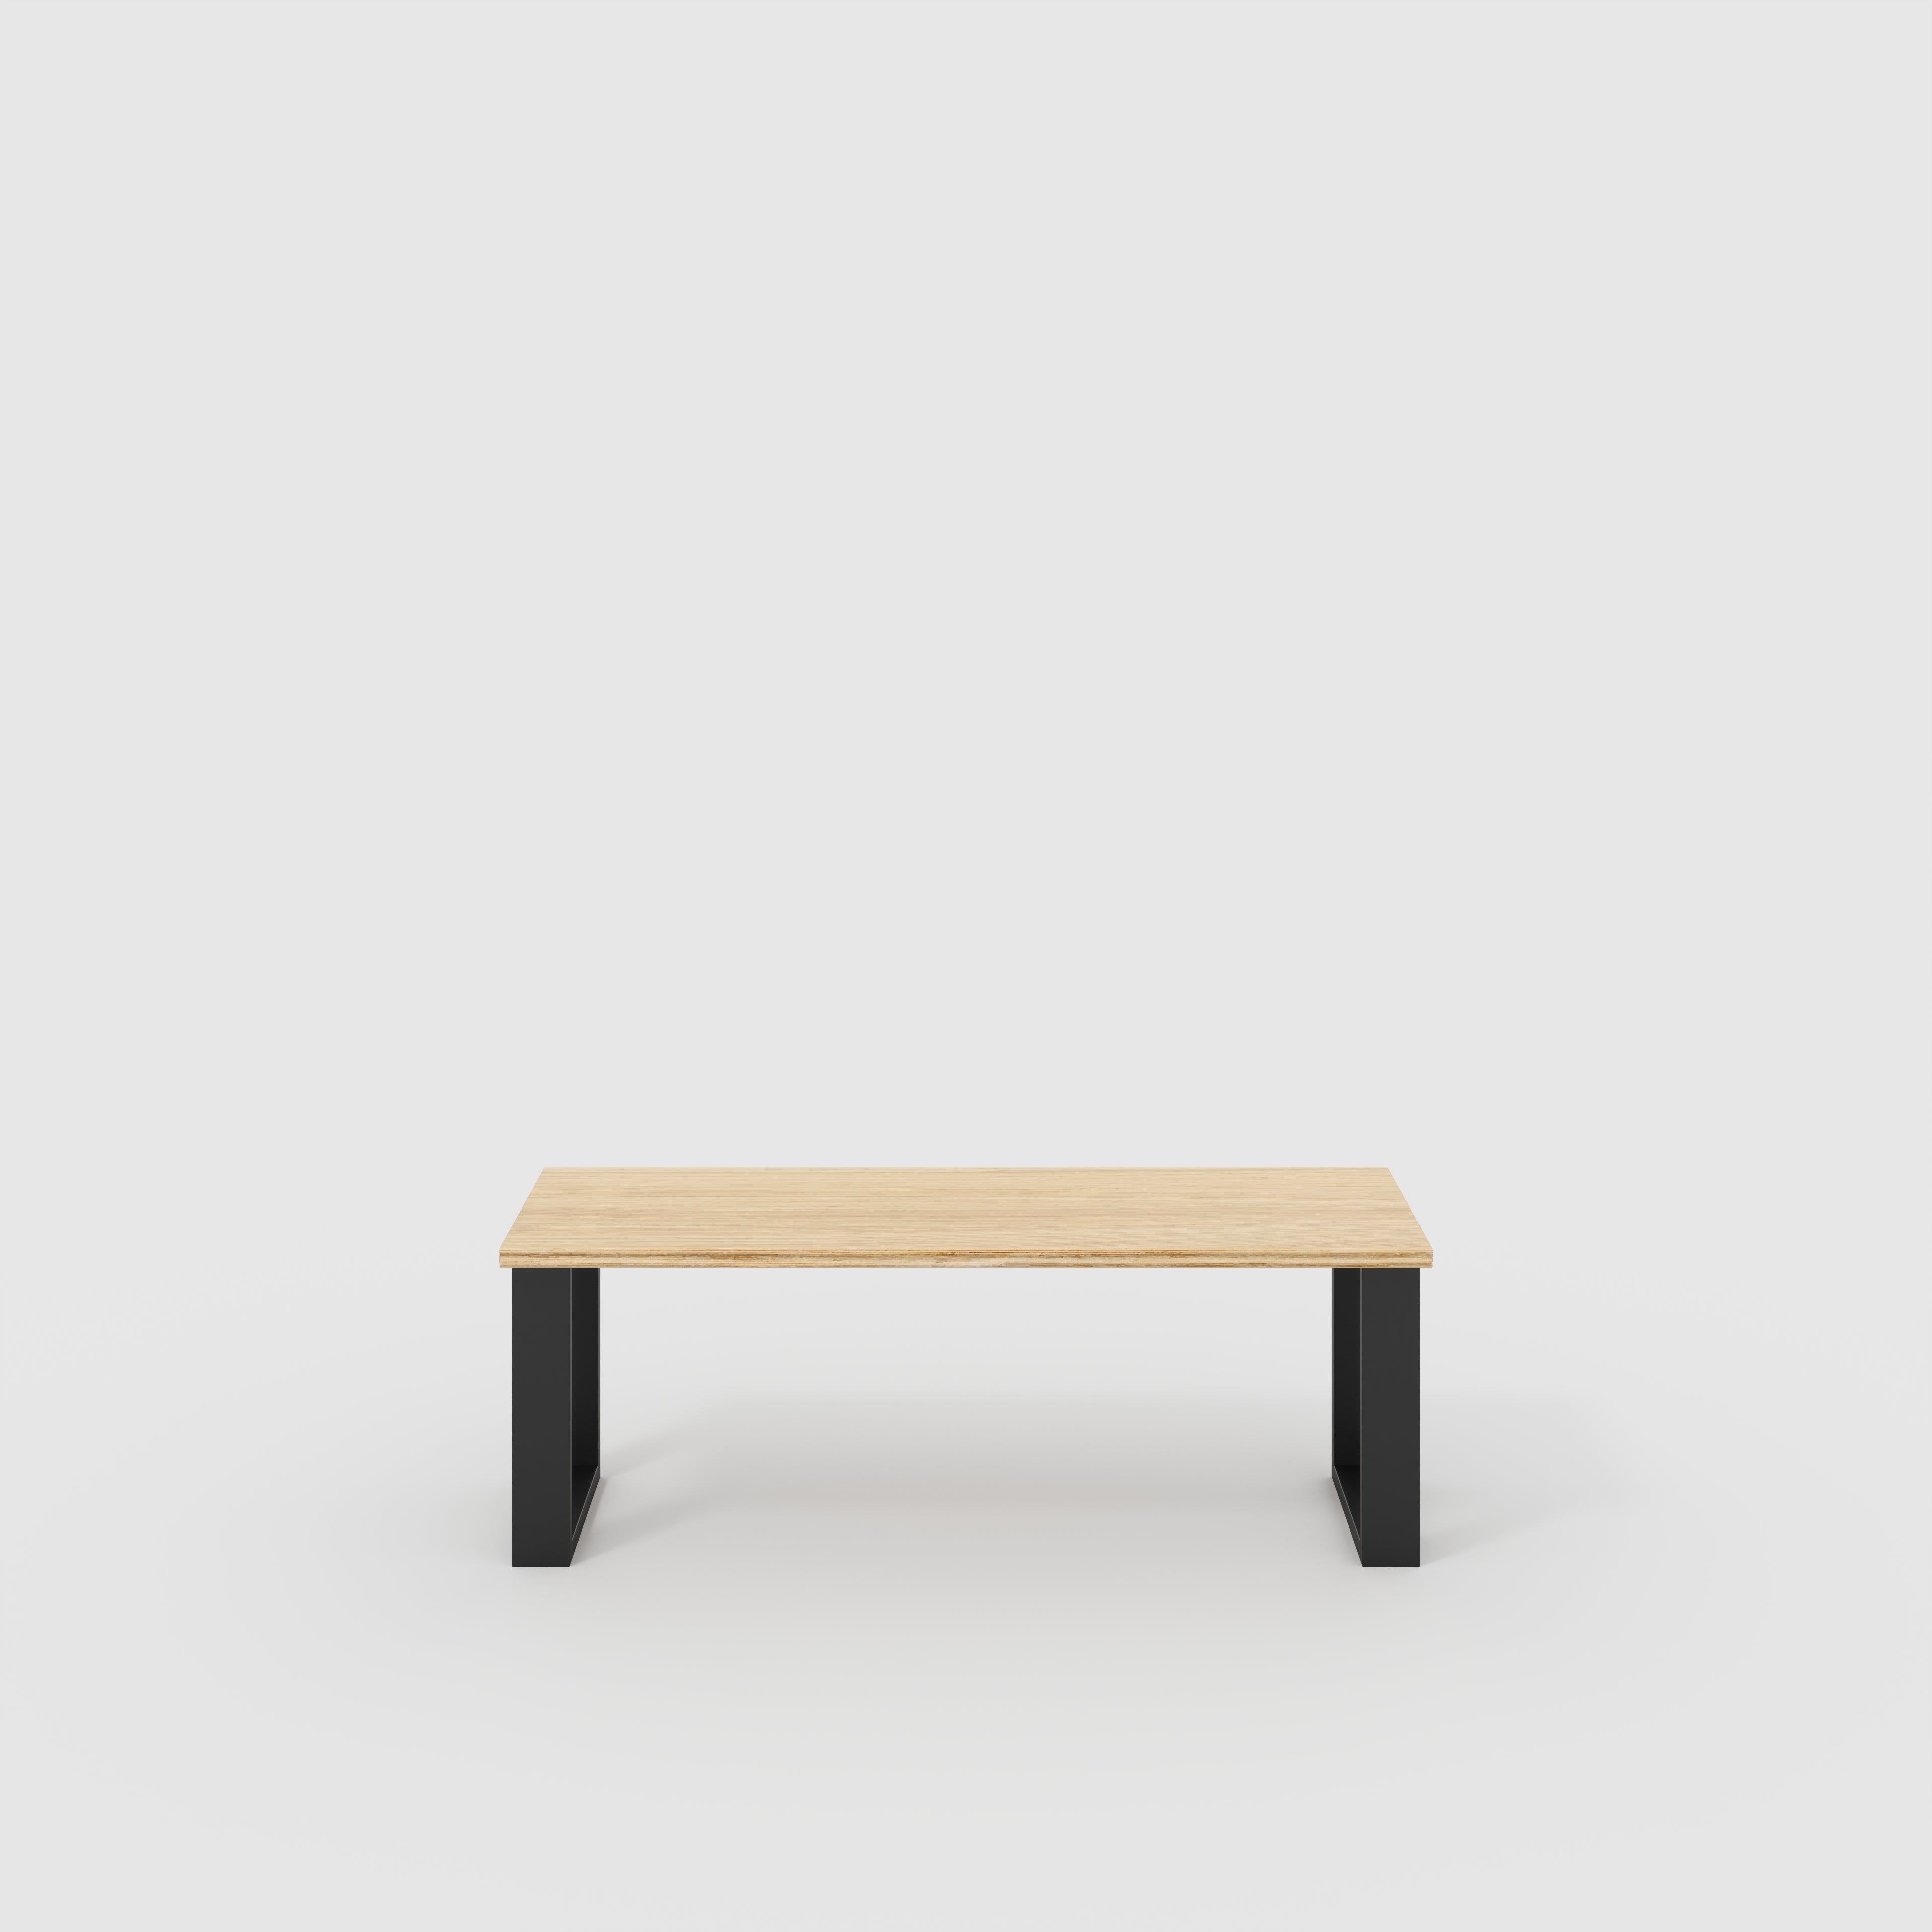 Bench Seat with Black Industrial Legs - Plywood Oak - 1200(w) x 400(d)